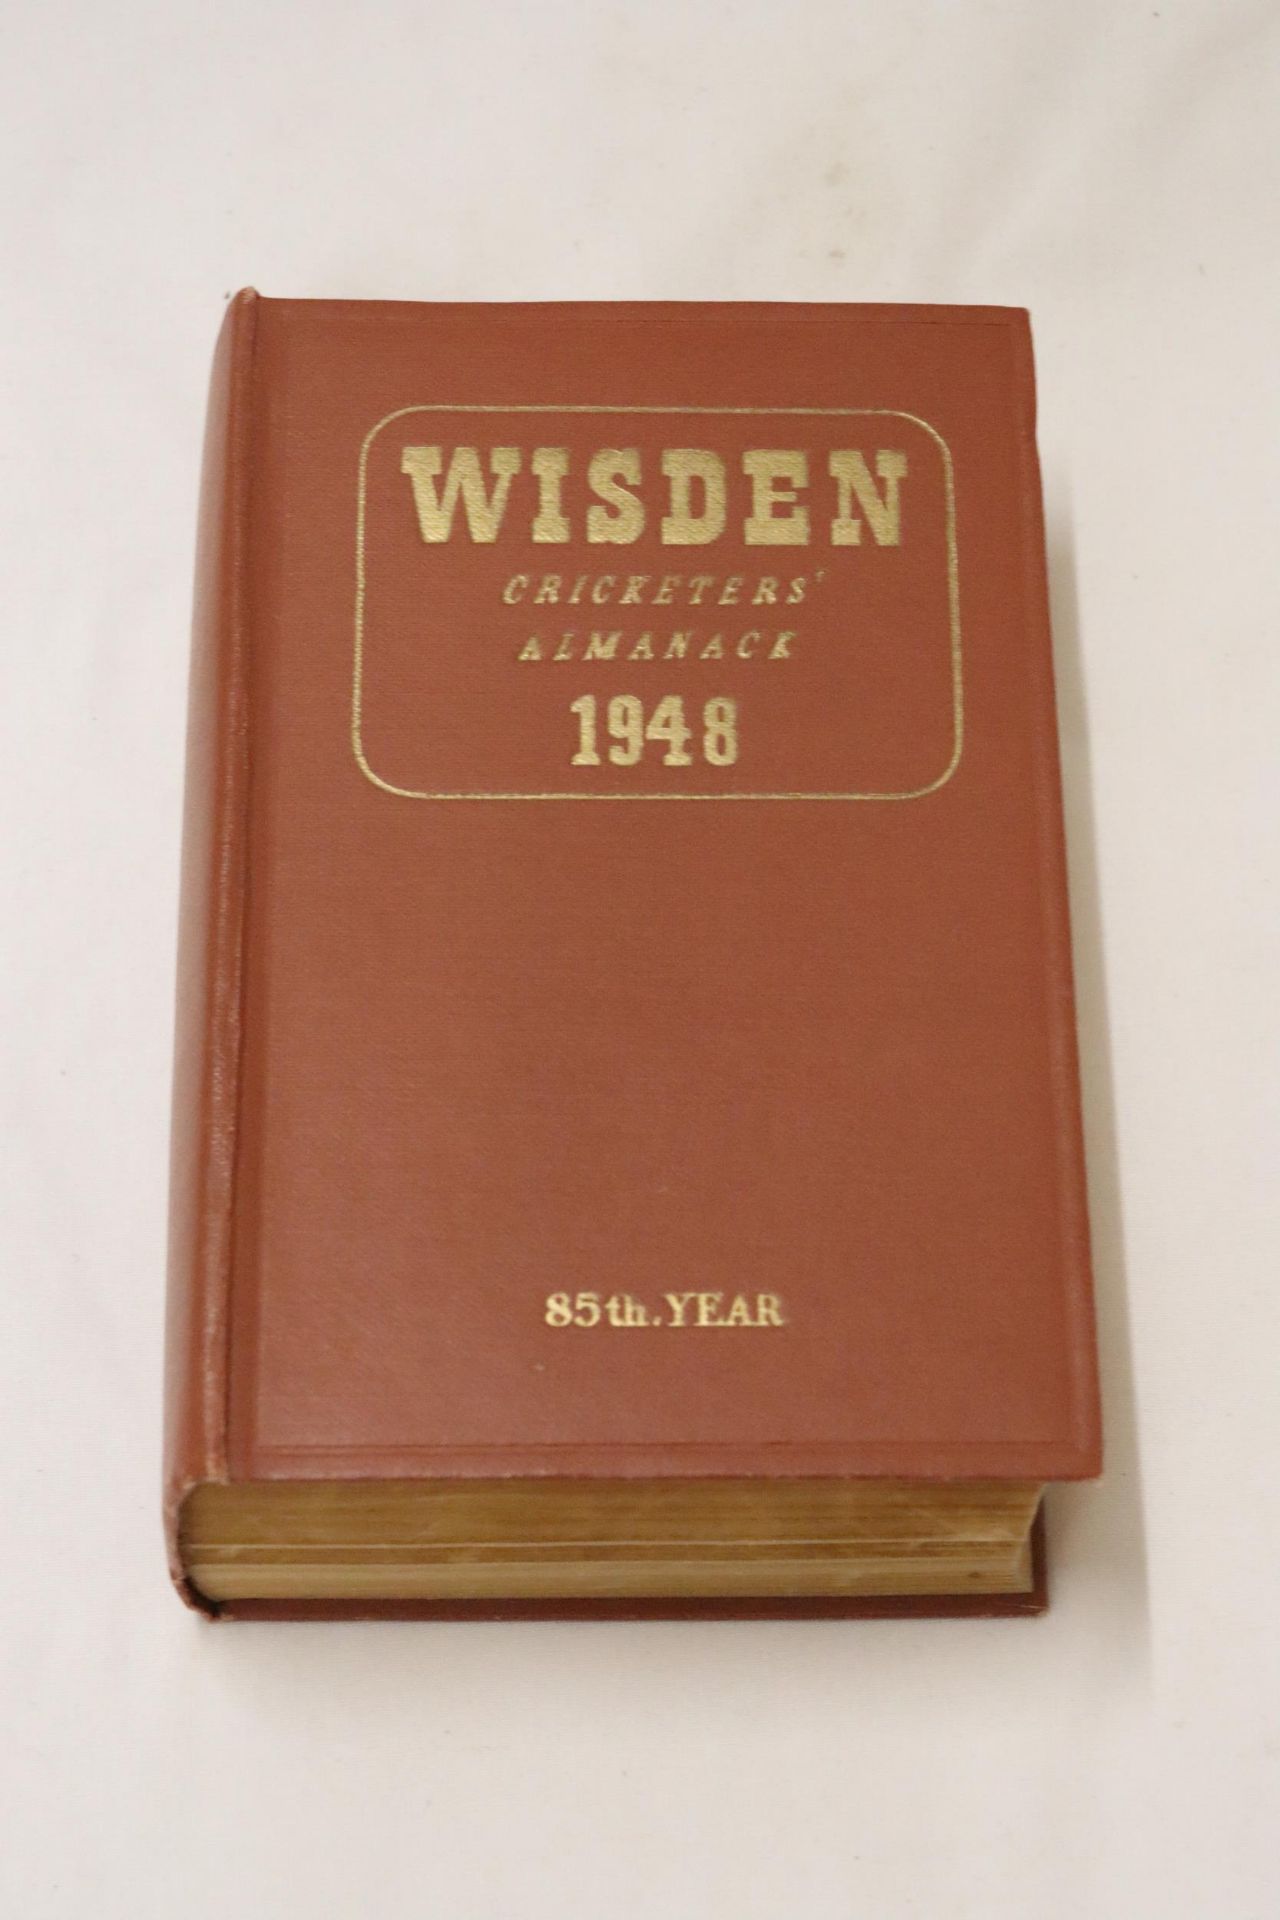 A HARDBACK 1948 COPY OF WISDEN'S CRICKETER'S ALMANACK. THIS COPY IS IN GOOD CONDITION. THE SPINE AND